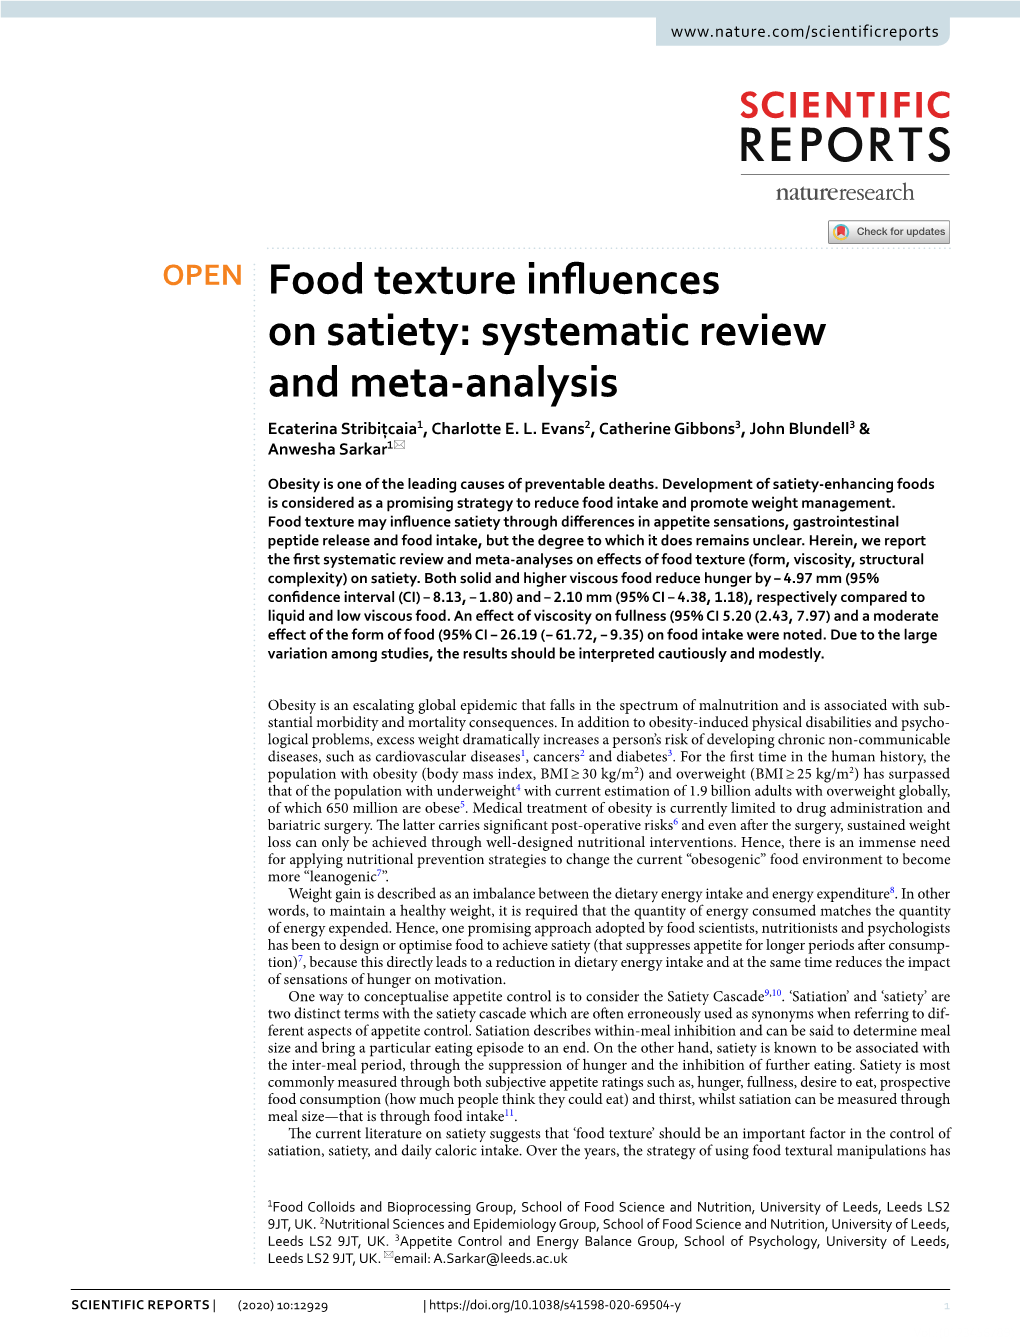 Food Texture Influences on Satiety: Systematic Review and Meta-Analysis